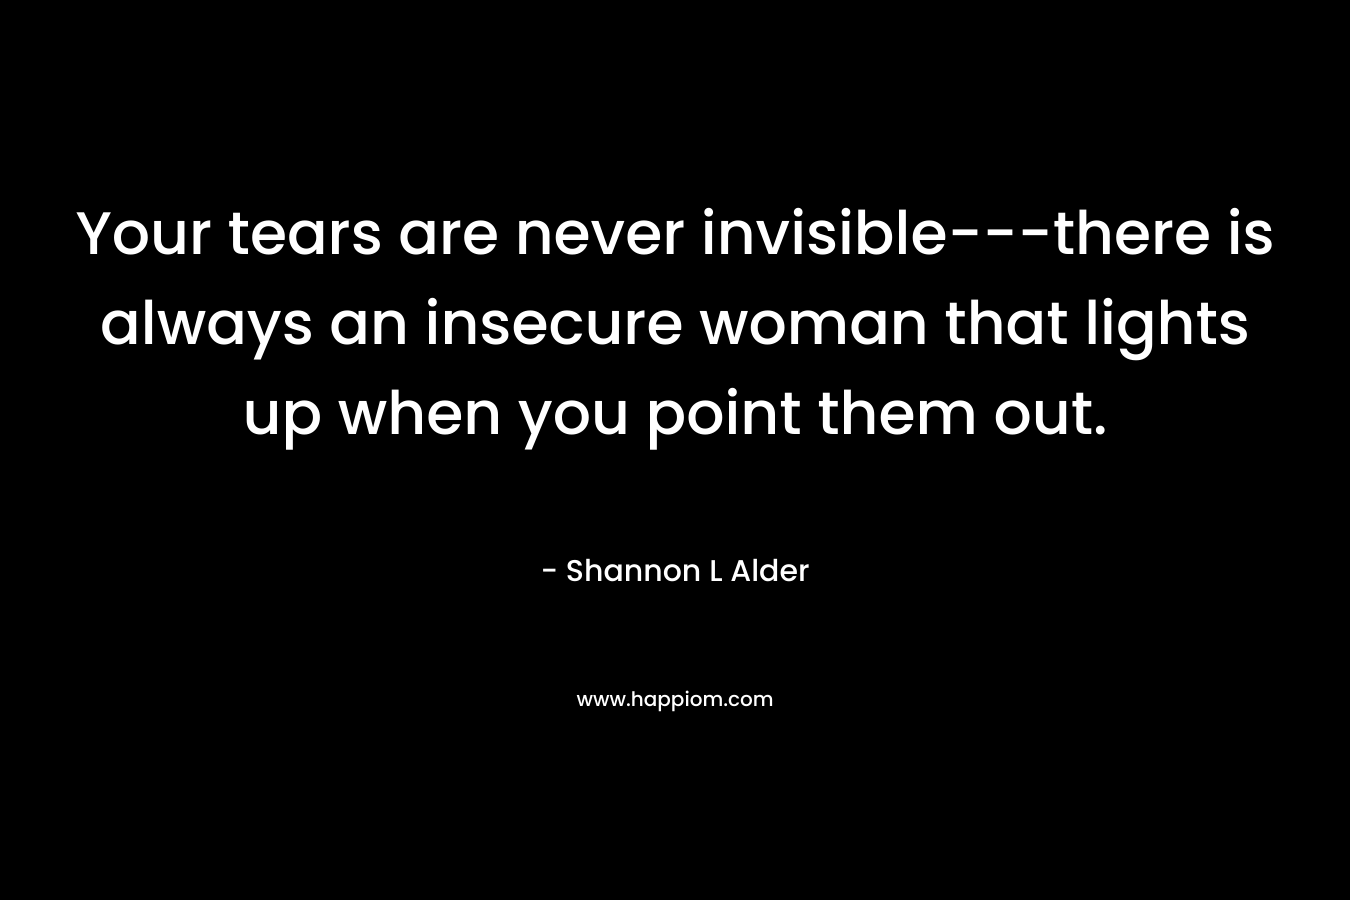 Your tears are never invisible—there is always an insecure woman that lights up when you point them out. – Shannon L Alder